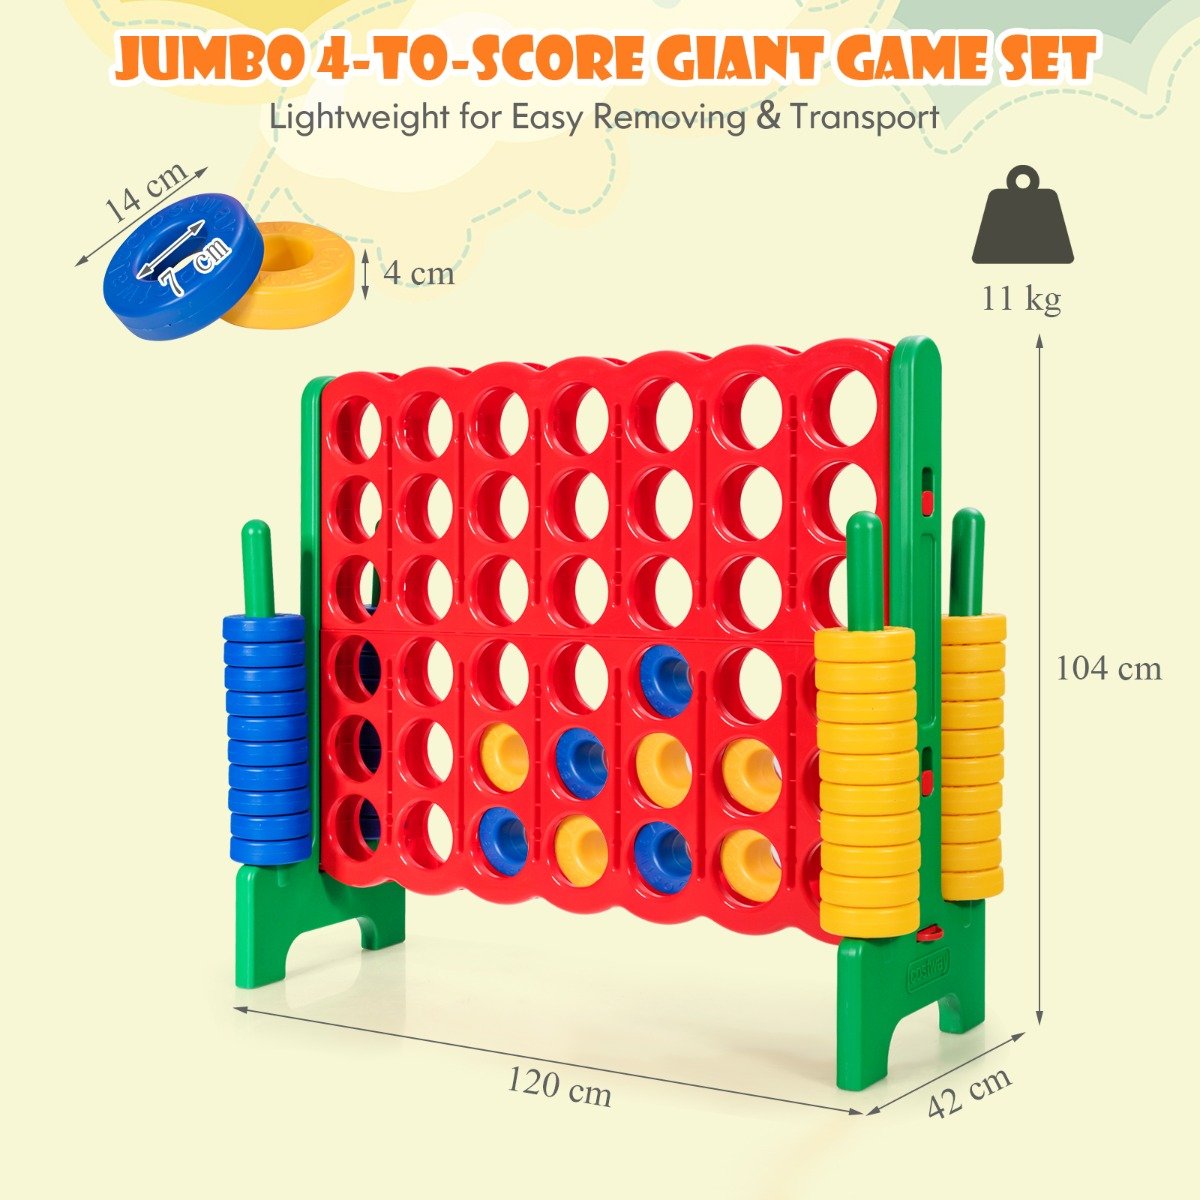 Giant Connect 4 Game Set - 42 Jumbo Rings for Active Entertainment